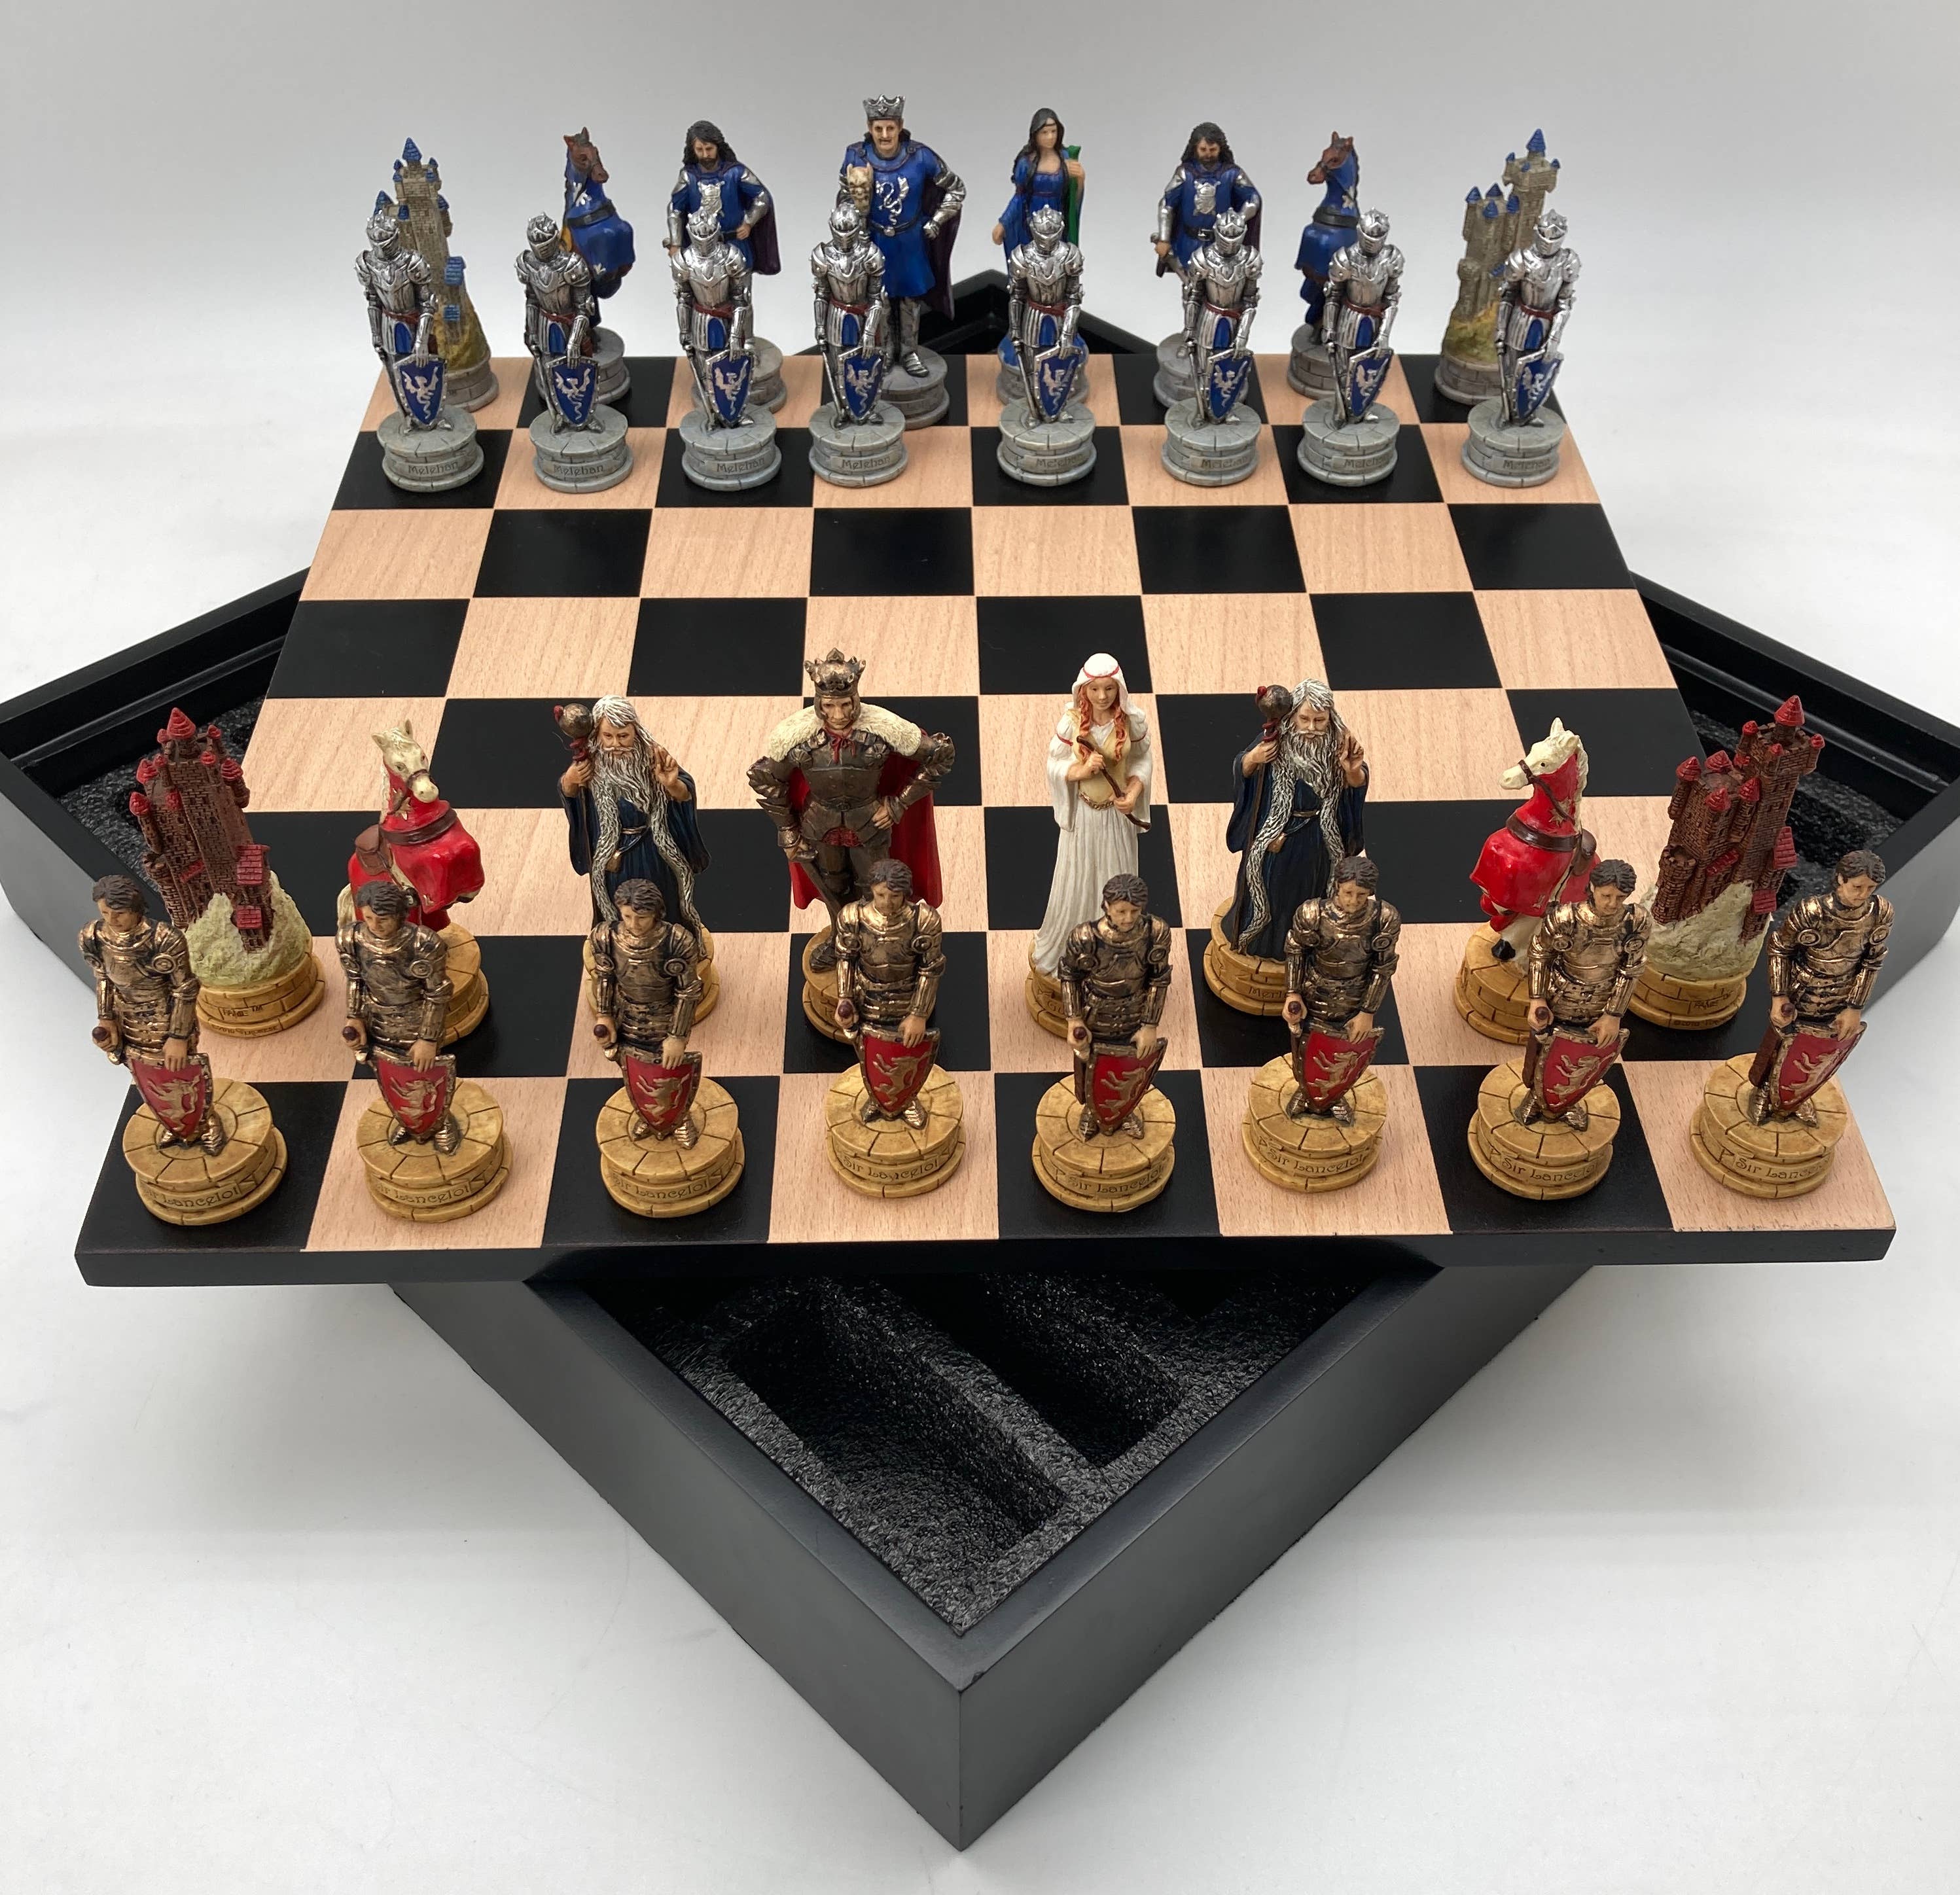 Medieval Times Crusades King Arthur Camelot Knights Chess Set Cherry Color Board 